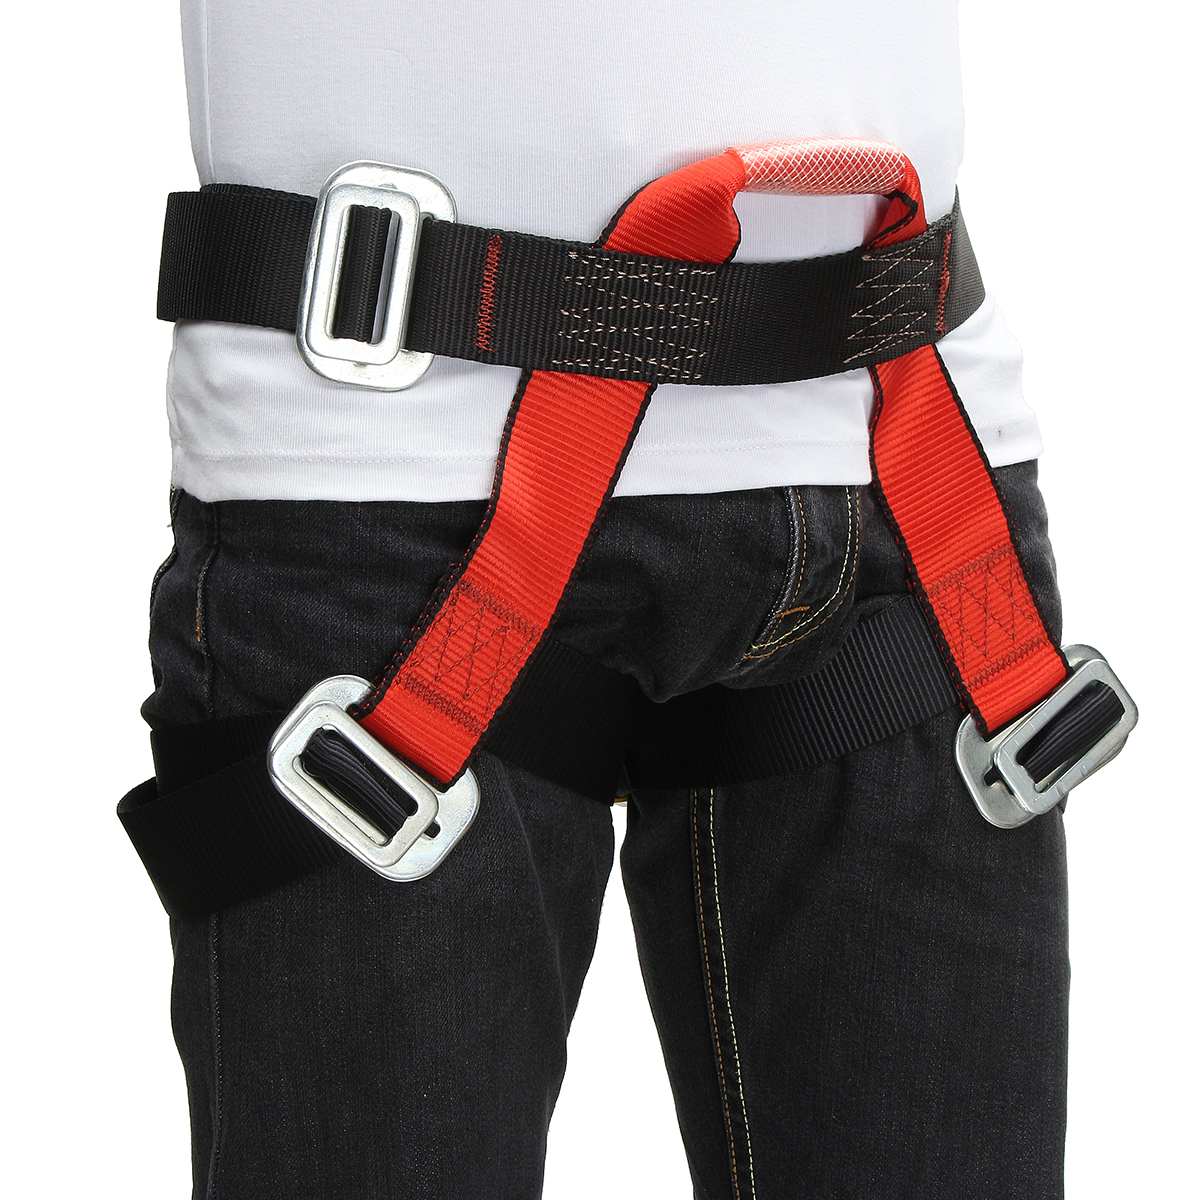 Outdoor-Mountain-Rock-Climbing-Rappelling-Harness-Bust-Belt-Rescue-Safety-Seat-Sitting-Strap-1130415-7